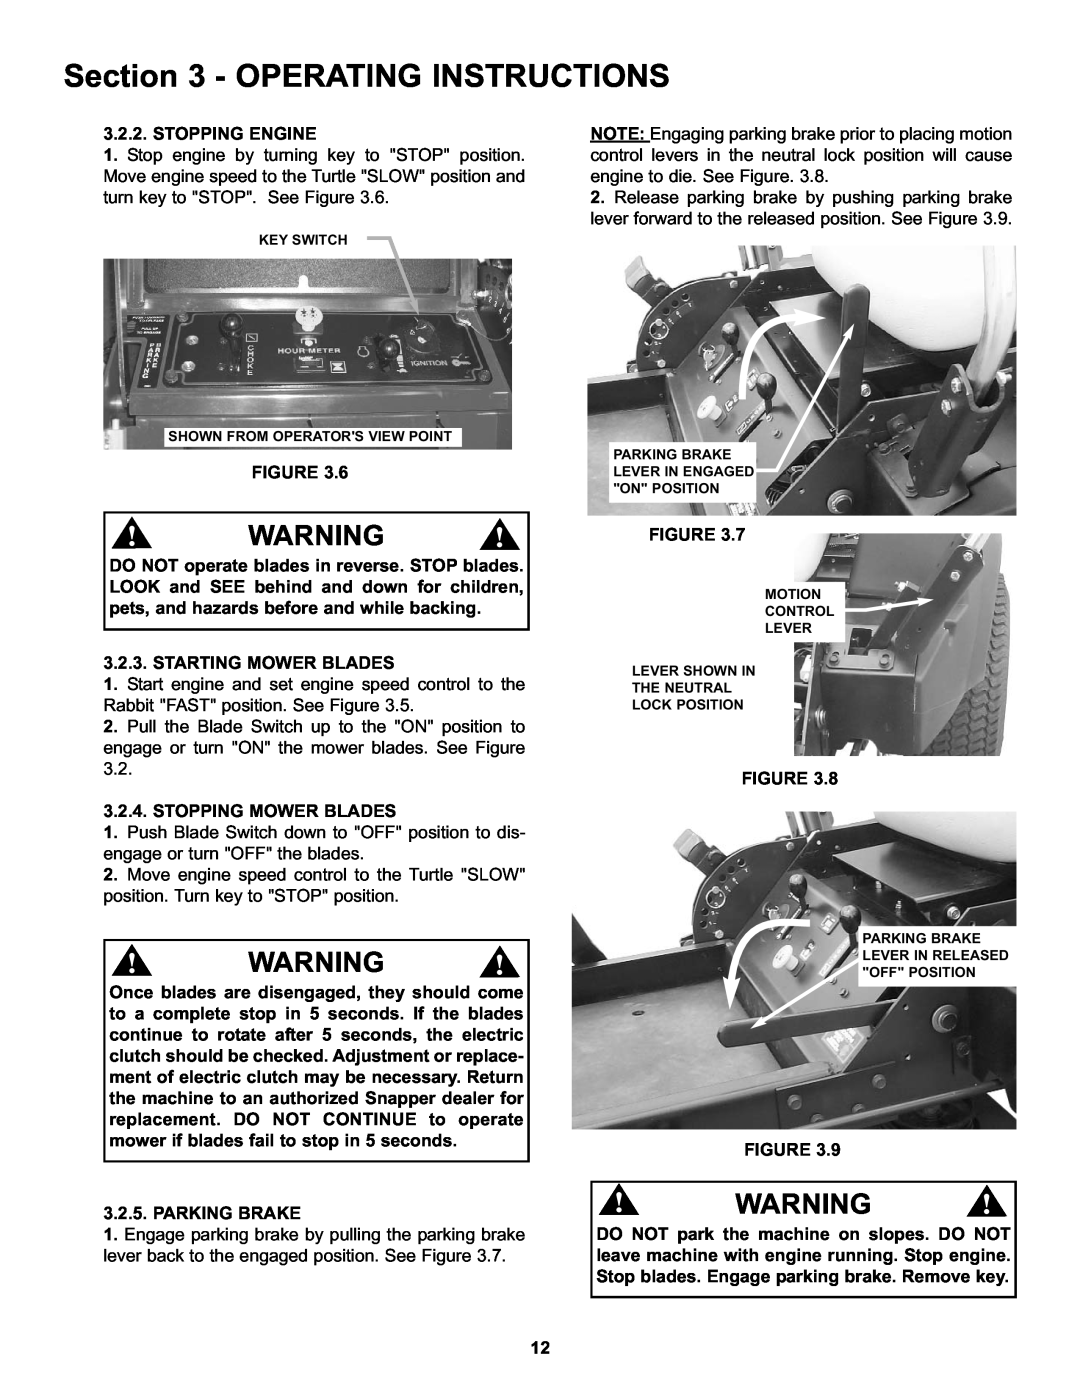 Snapper CZT19481KWV Operating Instructions, Stopping Engine, Starting Mower Blades, Stopping Mower Blades, Parking Brake 